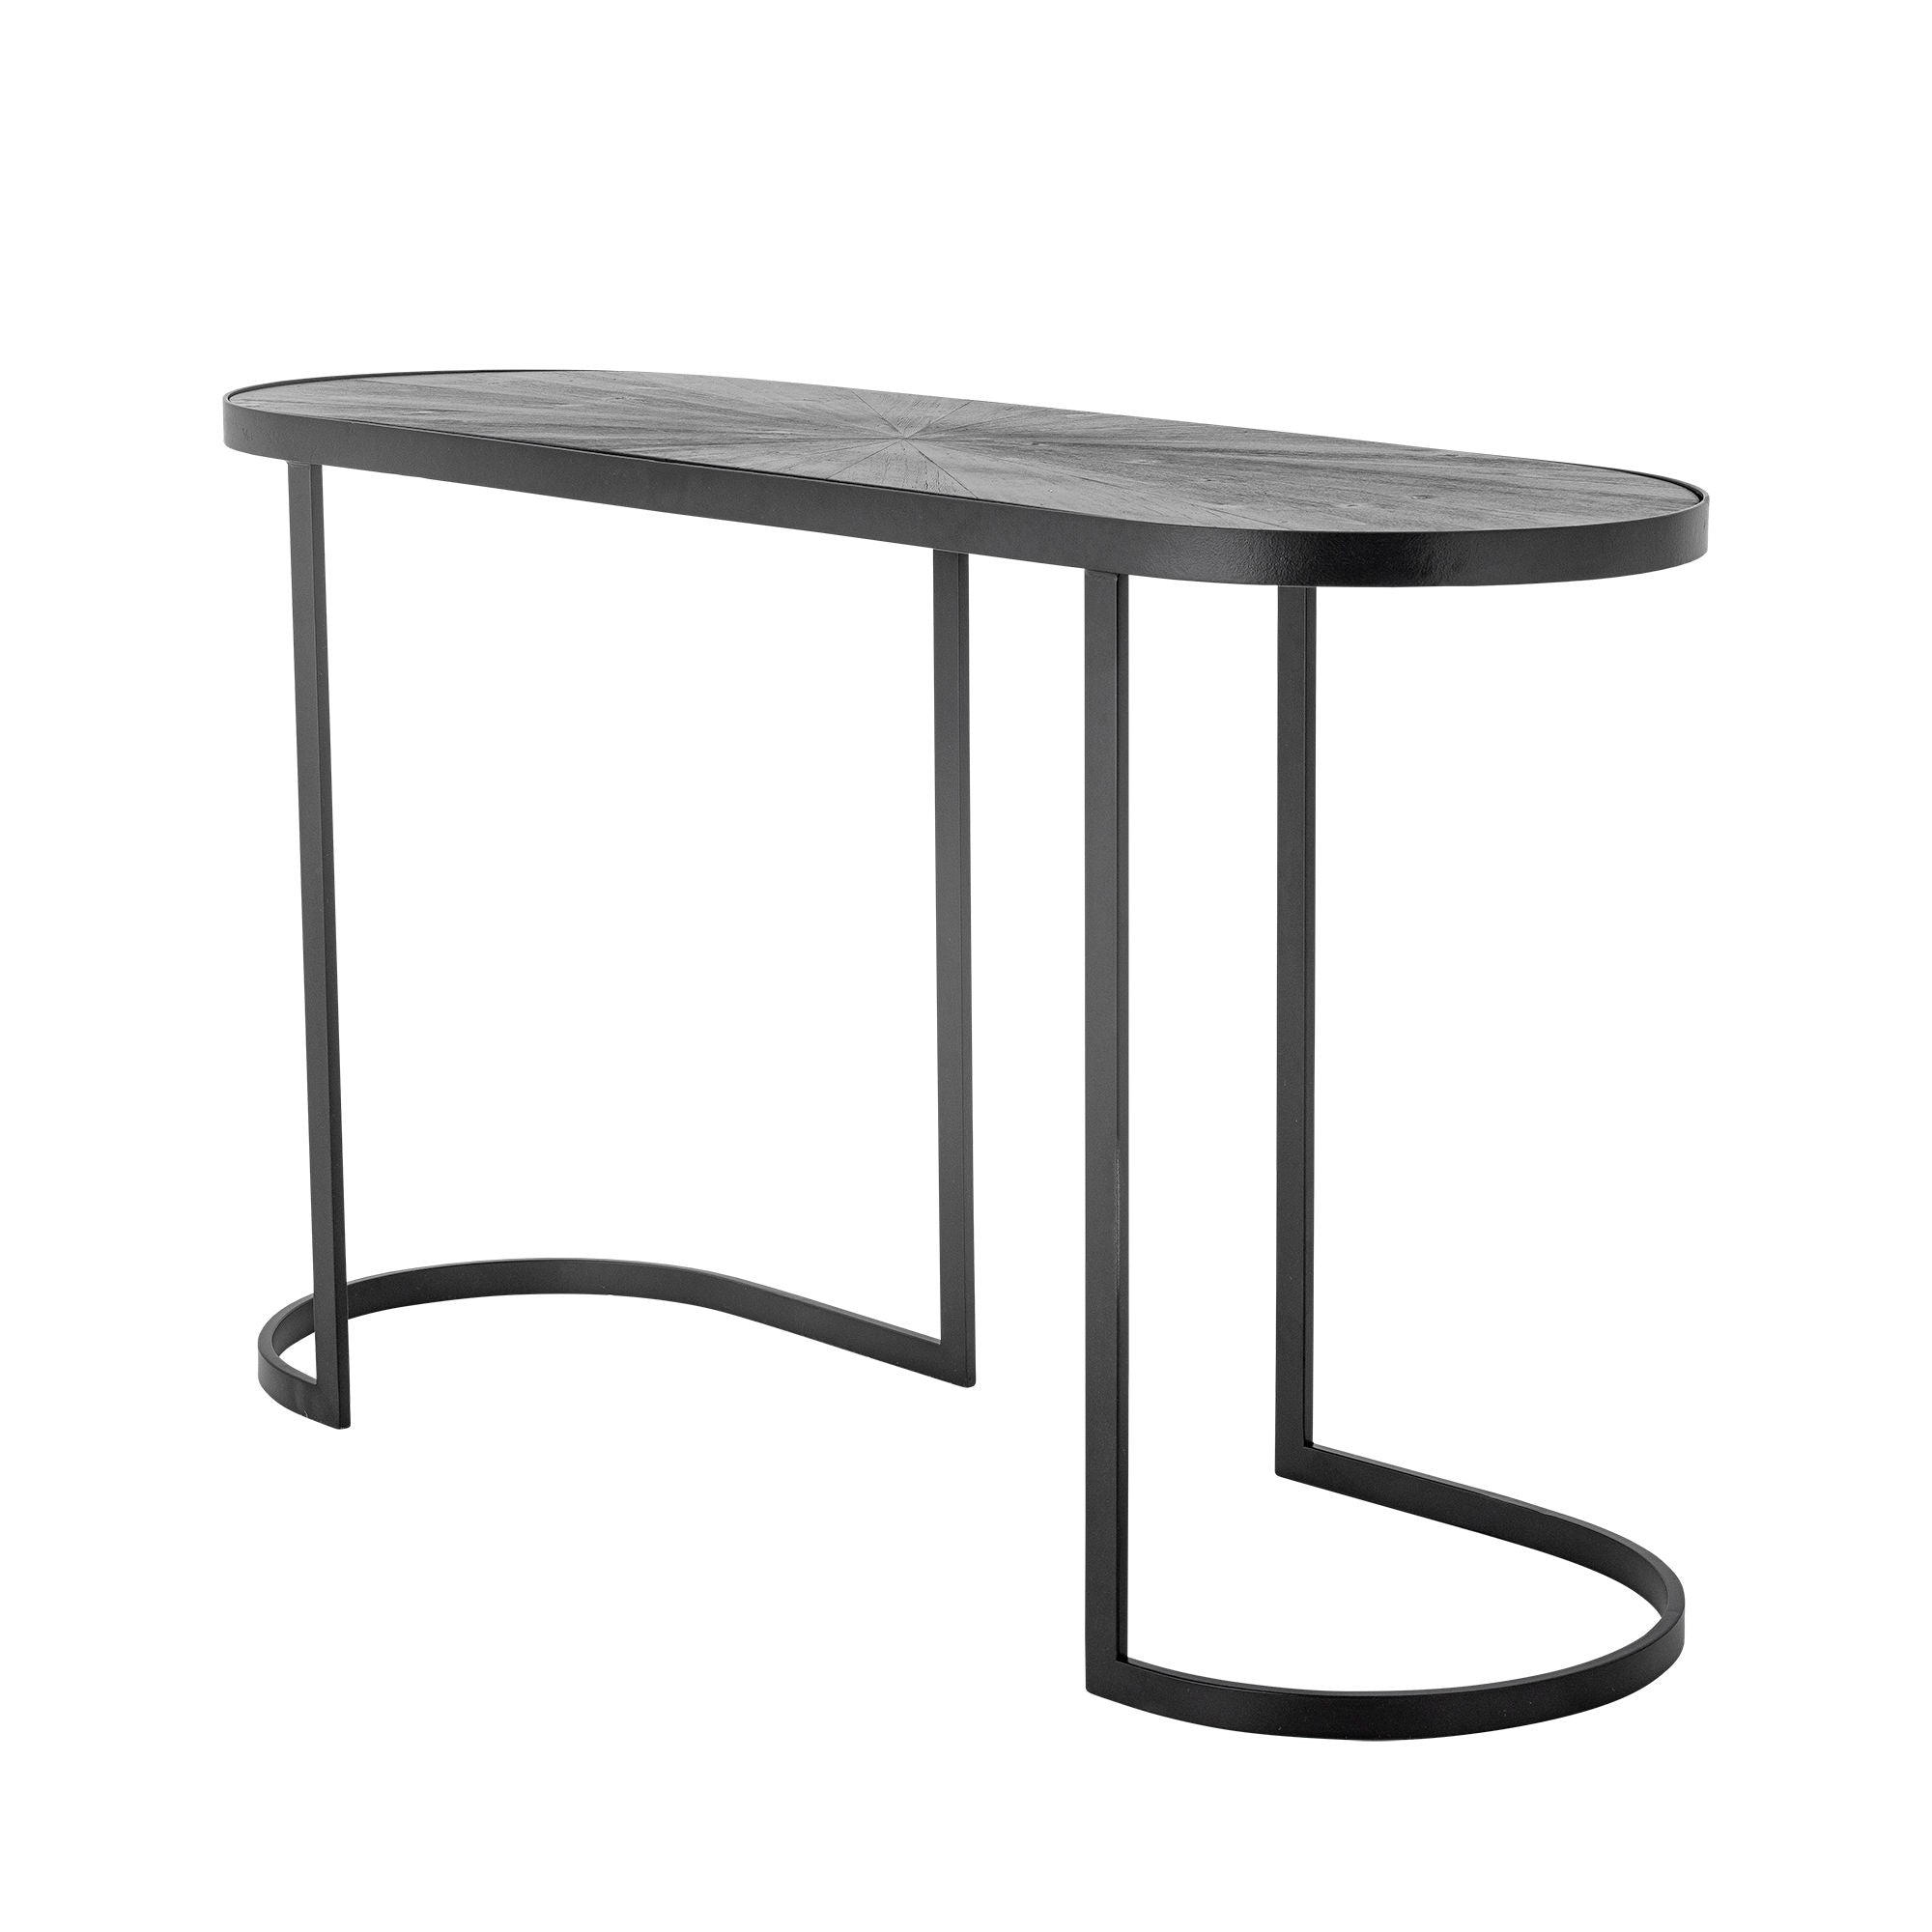 Bloomingville Carter Console Table, Black, MDF